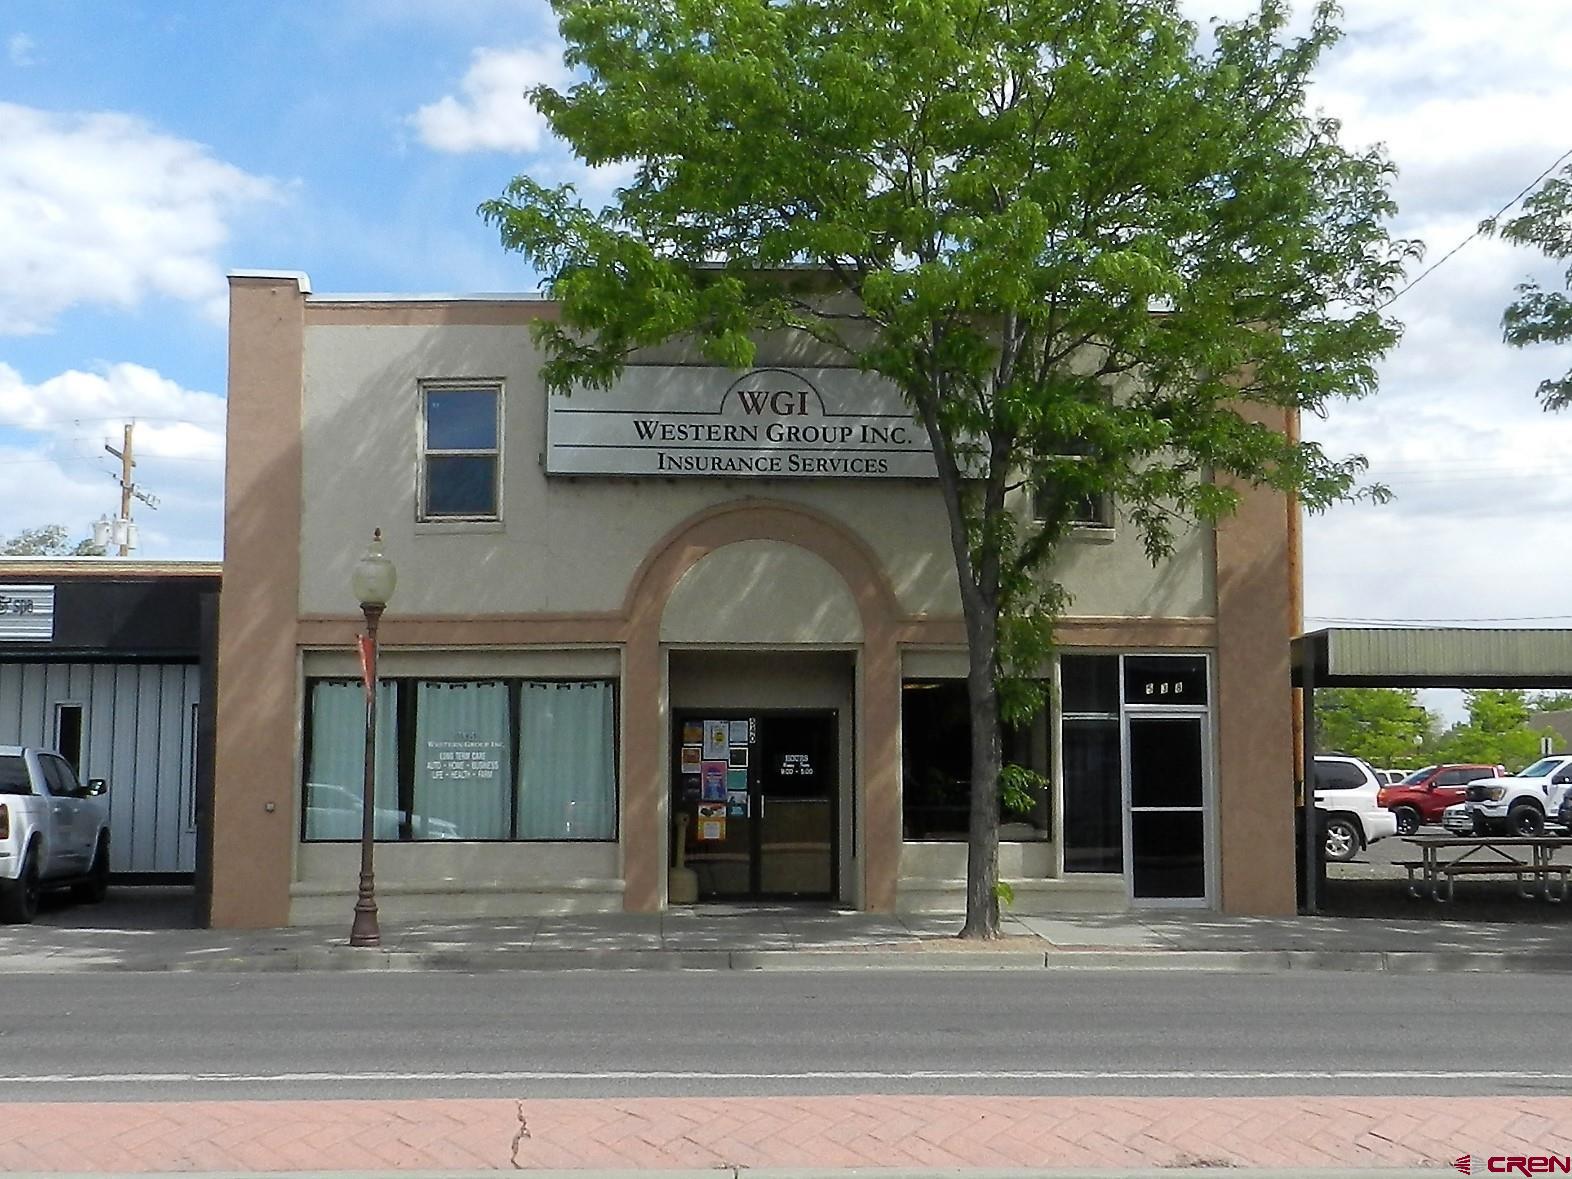 Outstanding Retail/Office Building with Ideal Location!   Prime Commercial Building and Position:   Amazing location, easy access off E Main and Park Ave in the heart of historic downtown Montrose. 8,235 sq. ft (MOL) building was built in 1936 and emphasizes three separate units. 10 S Park has 4,350 sq. ft. (MOL) and features two offices, two bathrooms (one ADA), three separate areas, a large lobby/reception area, high ceilings and alley access for deliveries. 540 E Main (main level) has 2,775 sq. ft. (MOL) and consists of 4 offices, conference room, large reception area, two ADA bathrooms, kitchenette and three large storage rooms. 538 E Main (upstairs apartment) has 1,110 sq. ft. (MOL) and highlights two bedrooms, one full bathroom, kitchen, living room and family room plus lots of storage in the five large closets. All three units are fully leased. This building sits adjacent to signalized intersection of Main and Park Ave. Zoned B-1 allowing for many uses including retail, business or professional offices, restaurant, dance studio, art center or childcare facility. Great investment opportunity! Take advantage of this ideal location and space!